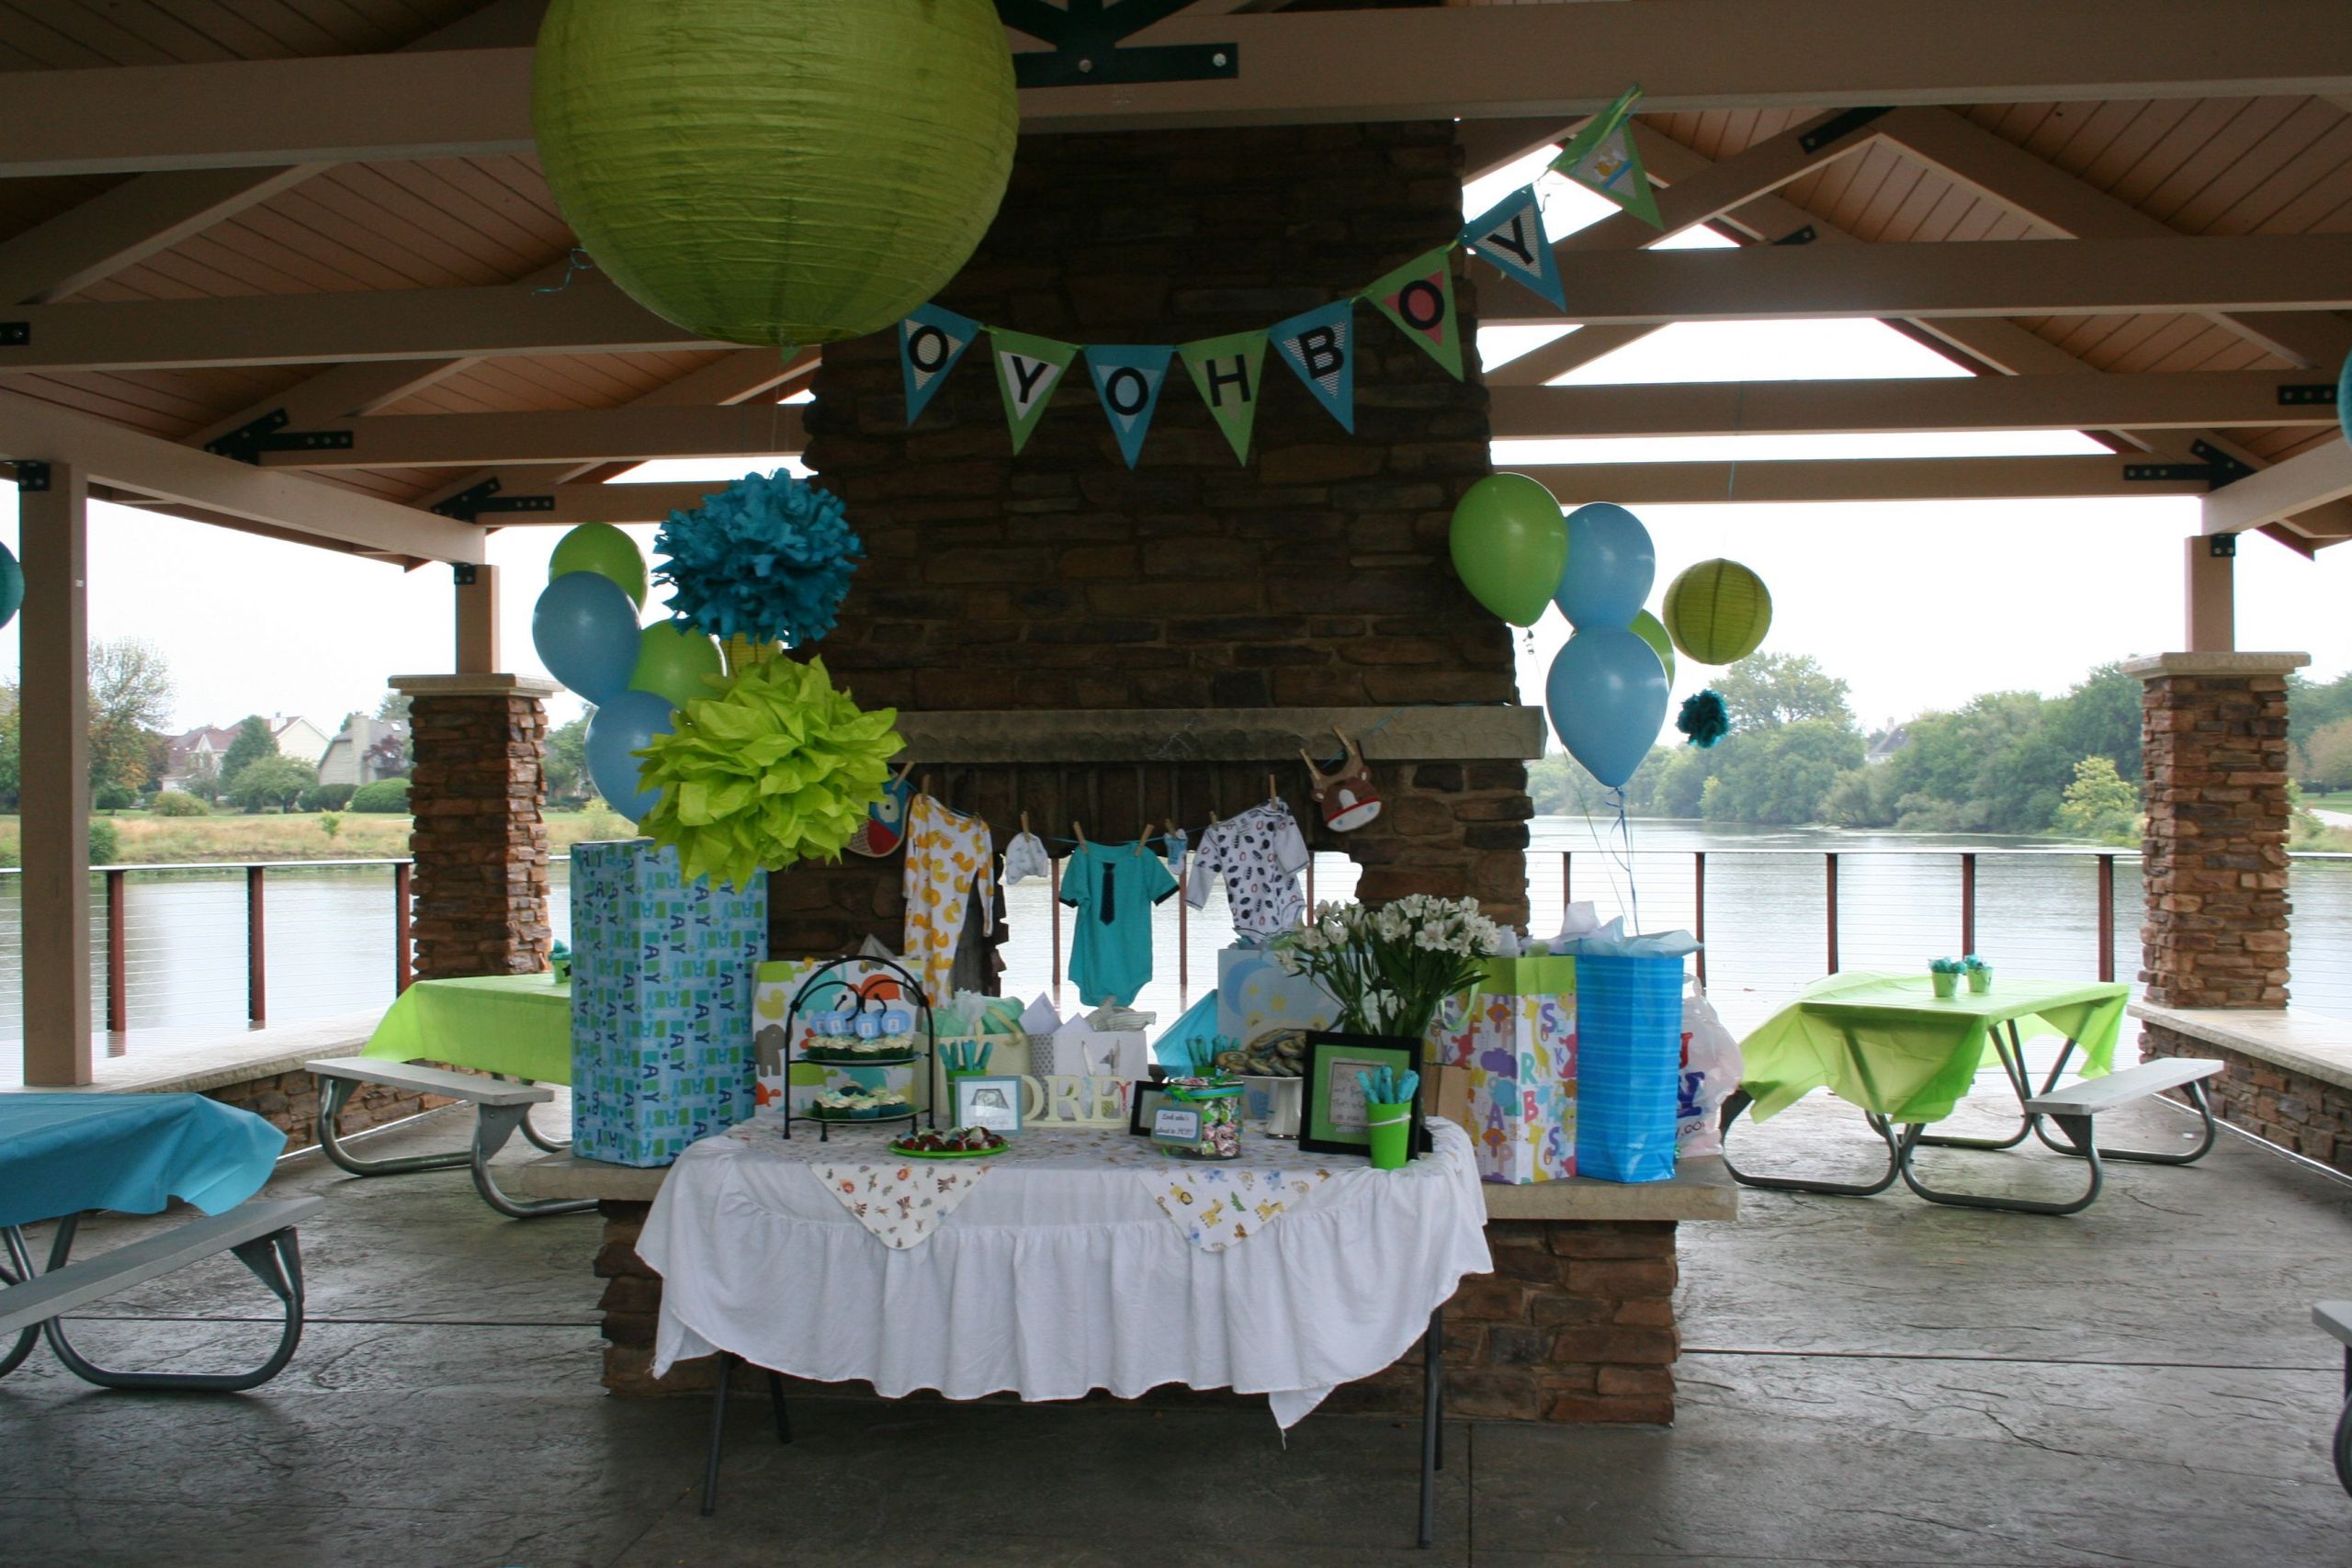 Outside Baby Shower Decoration Ideas
 I like the cute decorations and the splash of a few diff